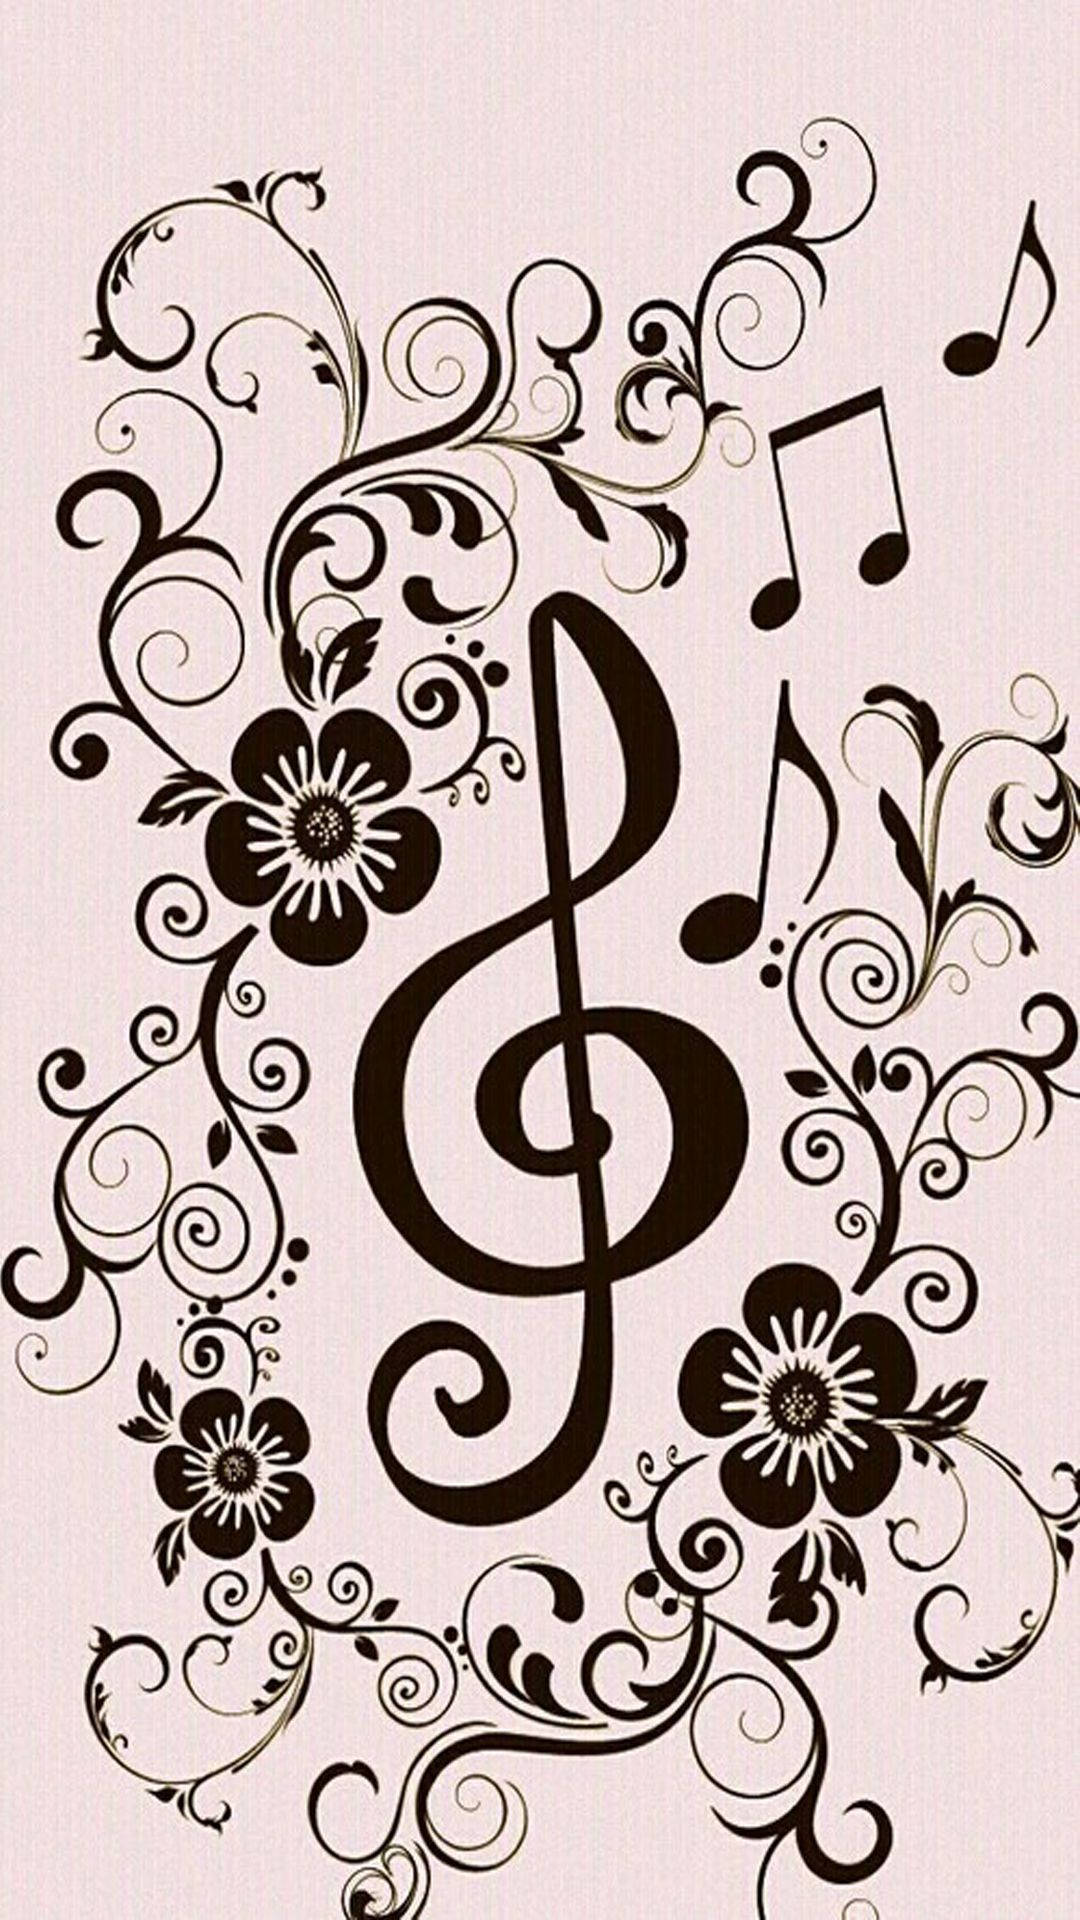 Download Cute Music Notes Floral Aesthetic Wallpaper 